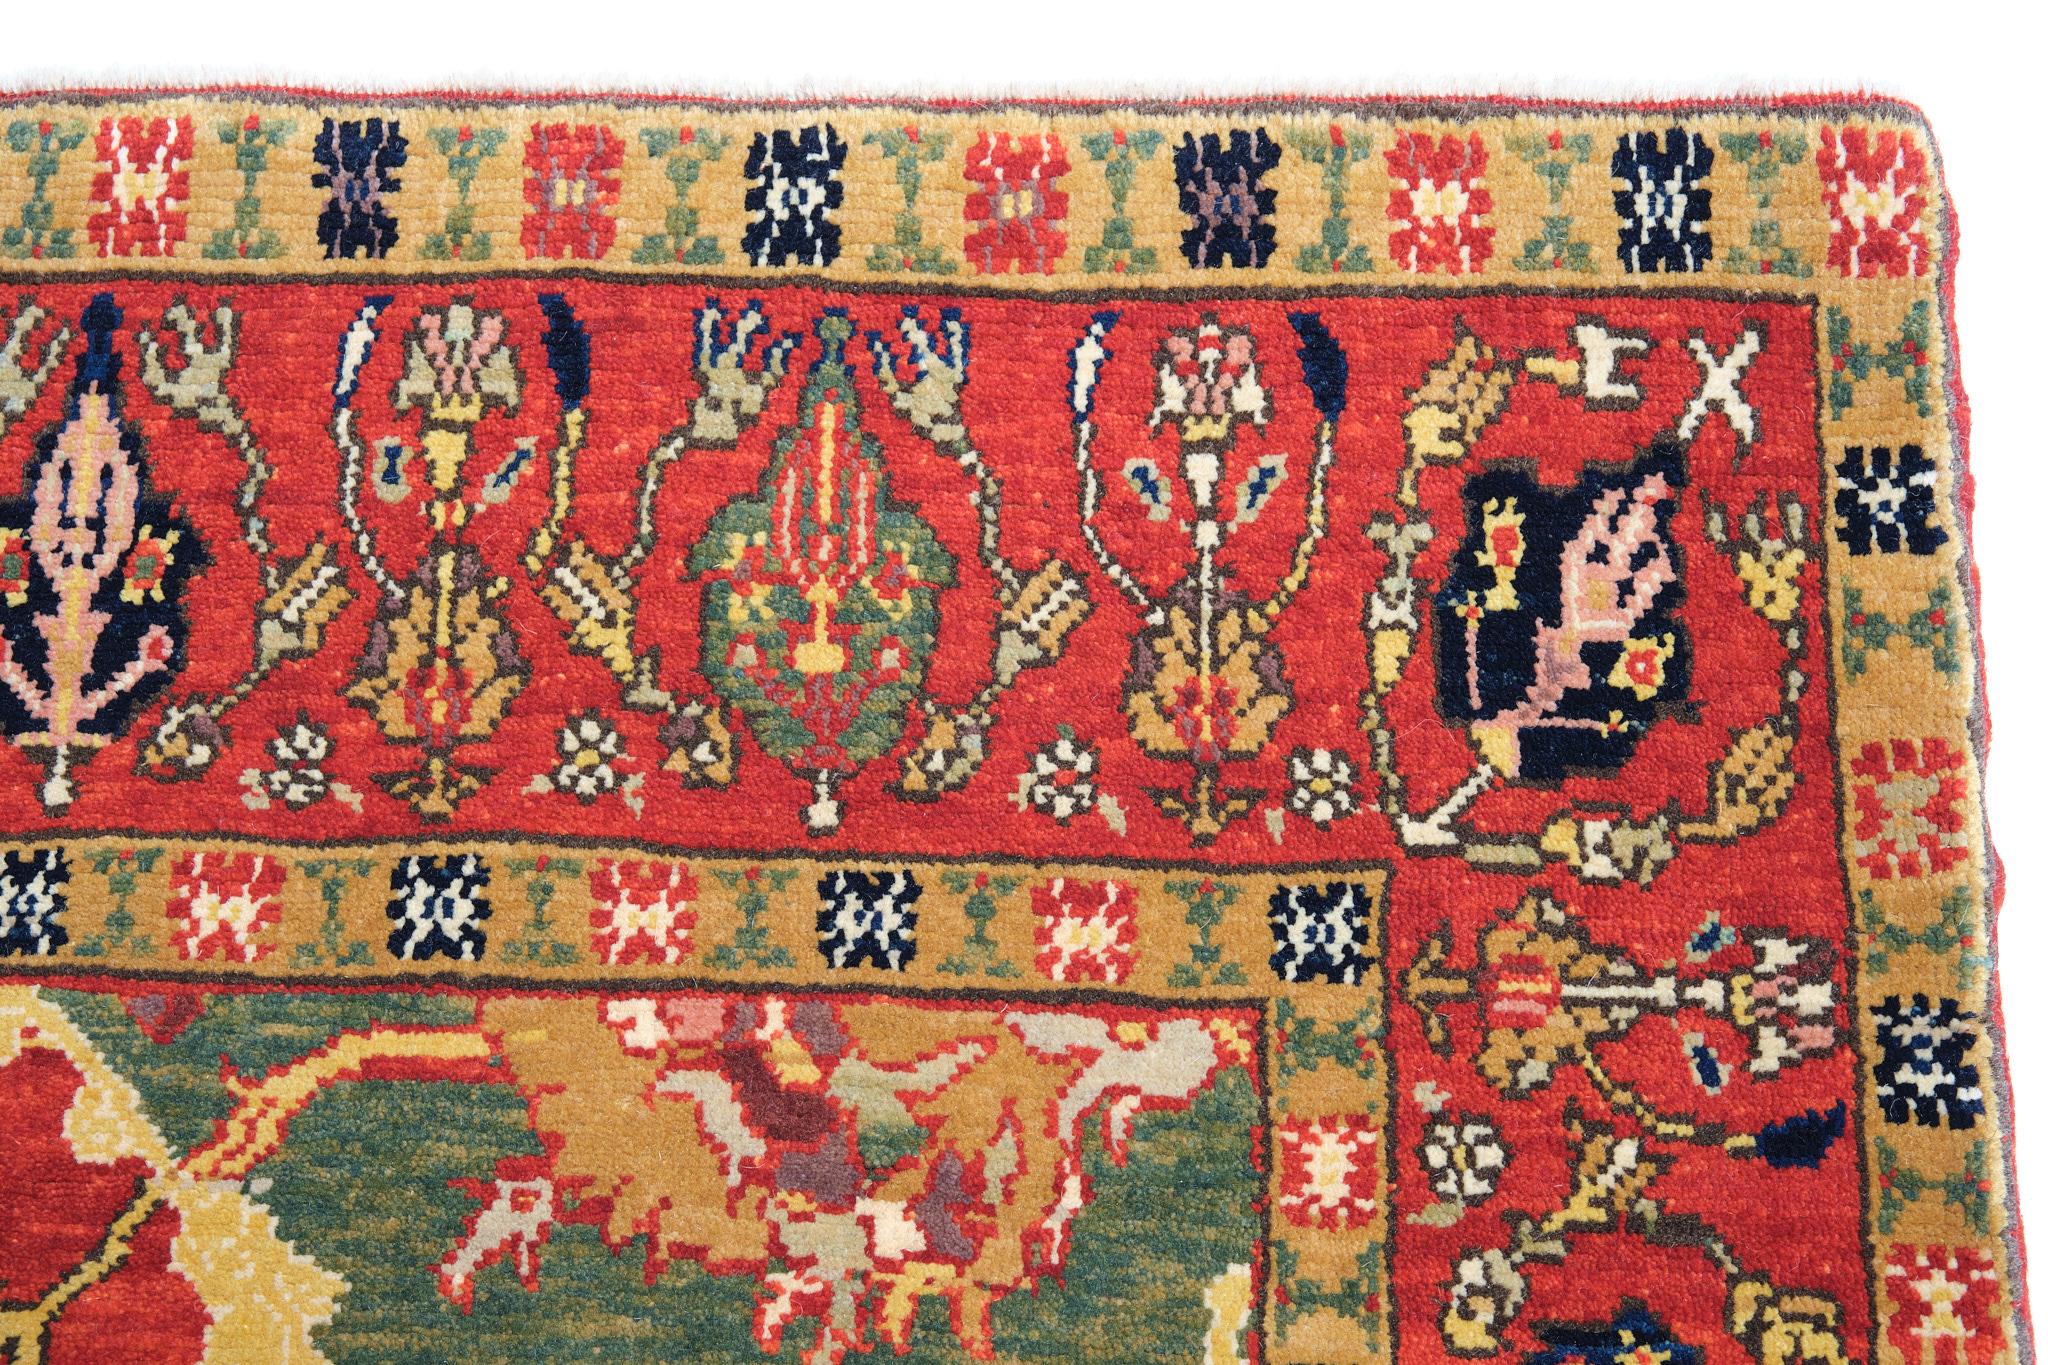 Turkish Court Manufactury Rugs were woven in the Egyptian workshops founded by Ottoman Empire in the 16th century. Those carpets were woven in Egypt, following the paper cartoons probably created in Istanbul and sent to Cairo then.
The source of